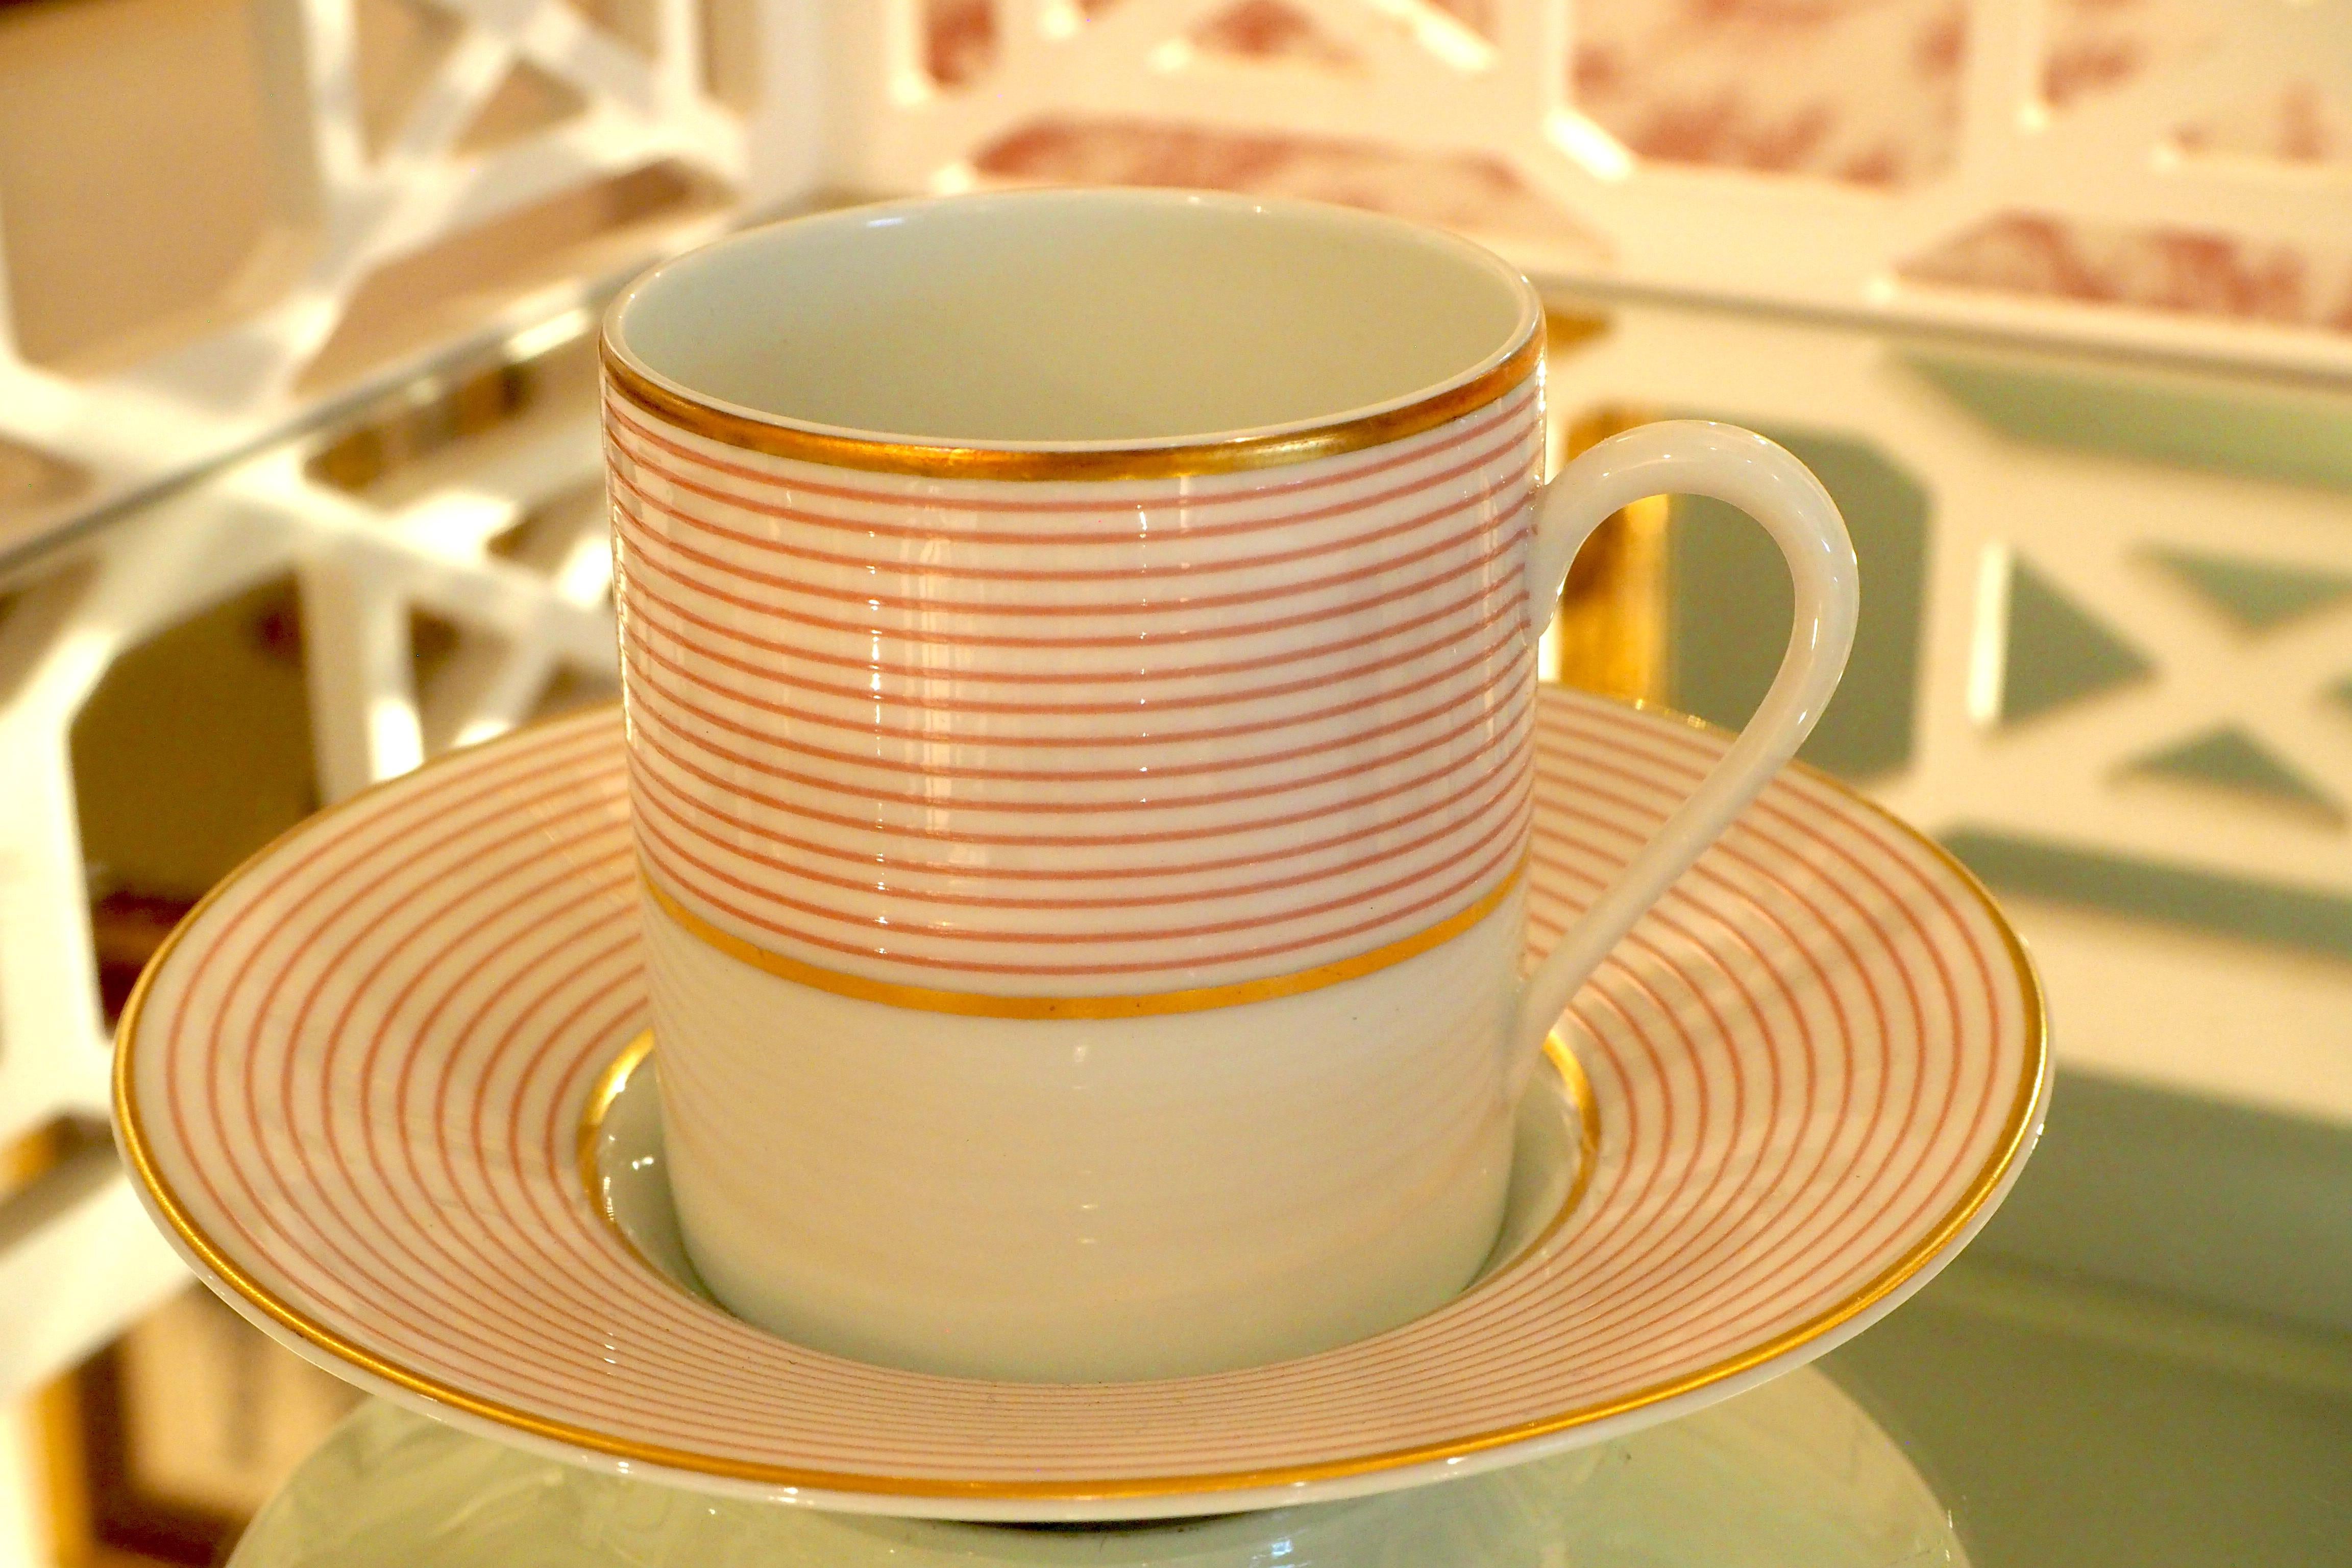 Porcelain Set of French Coffee Cups and Saucers from La Maison Raynaud, Limoges